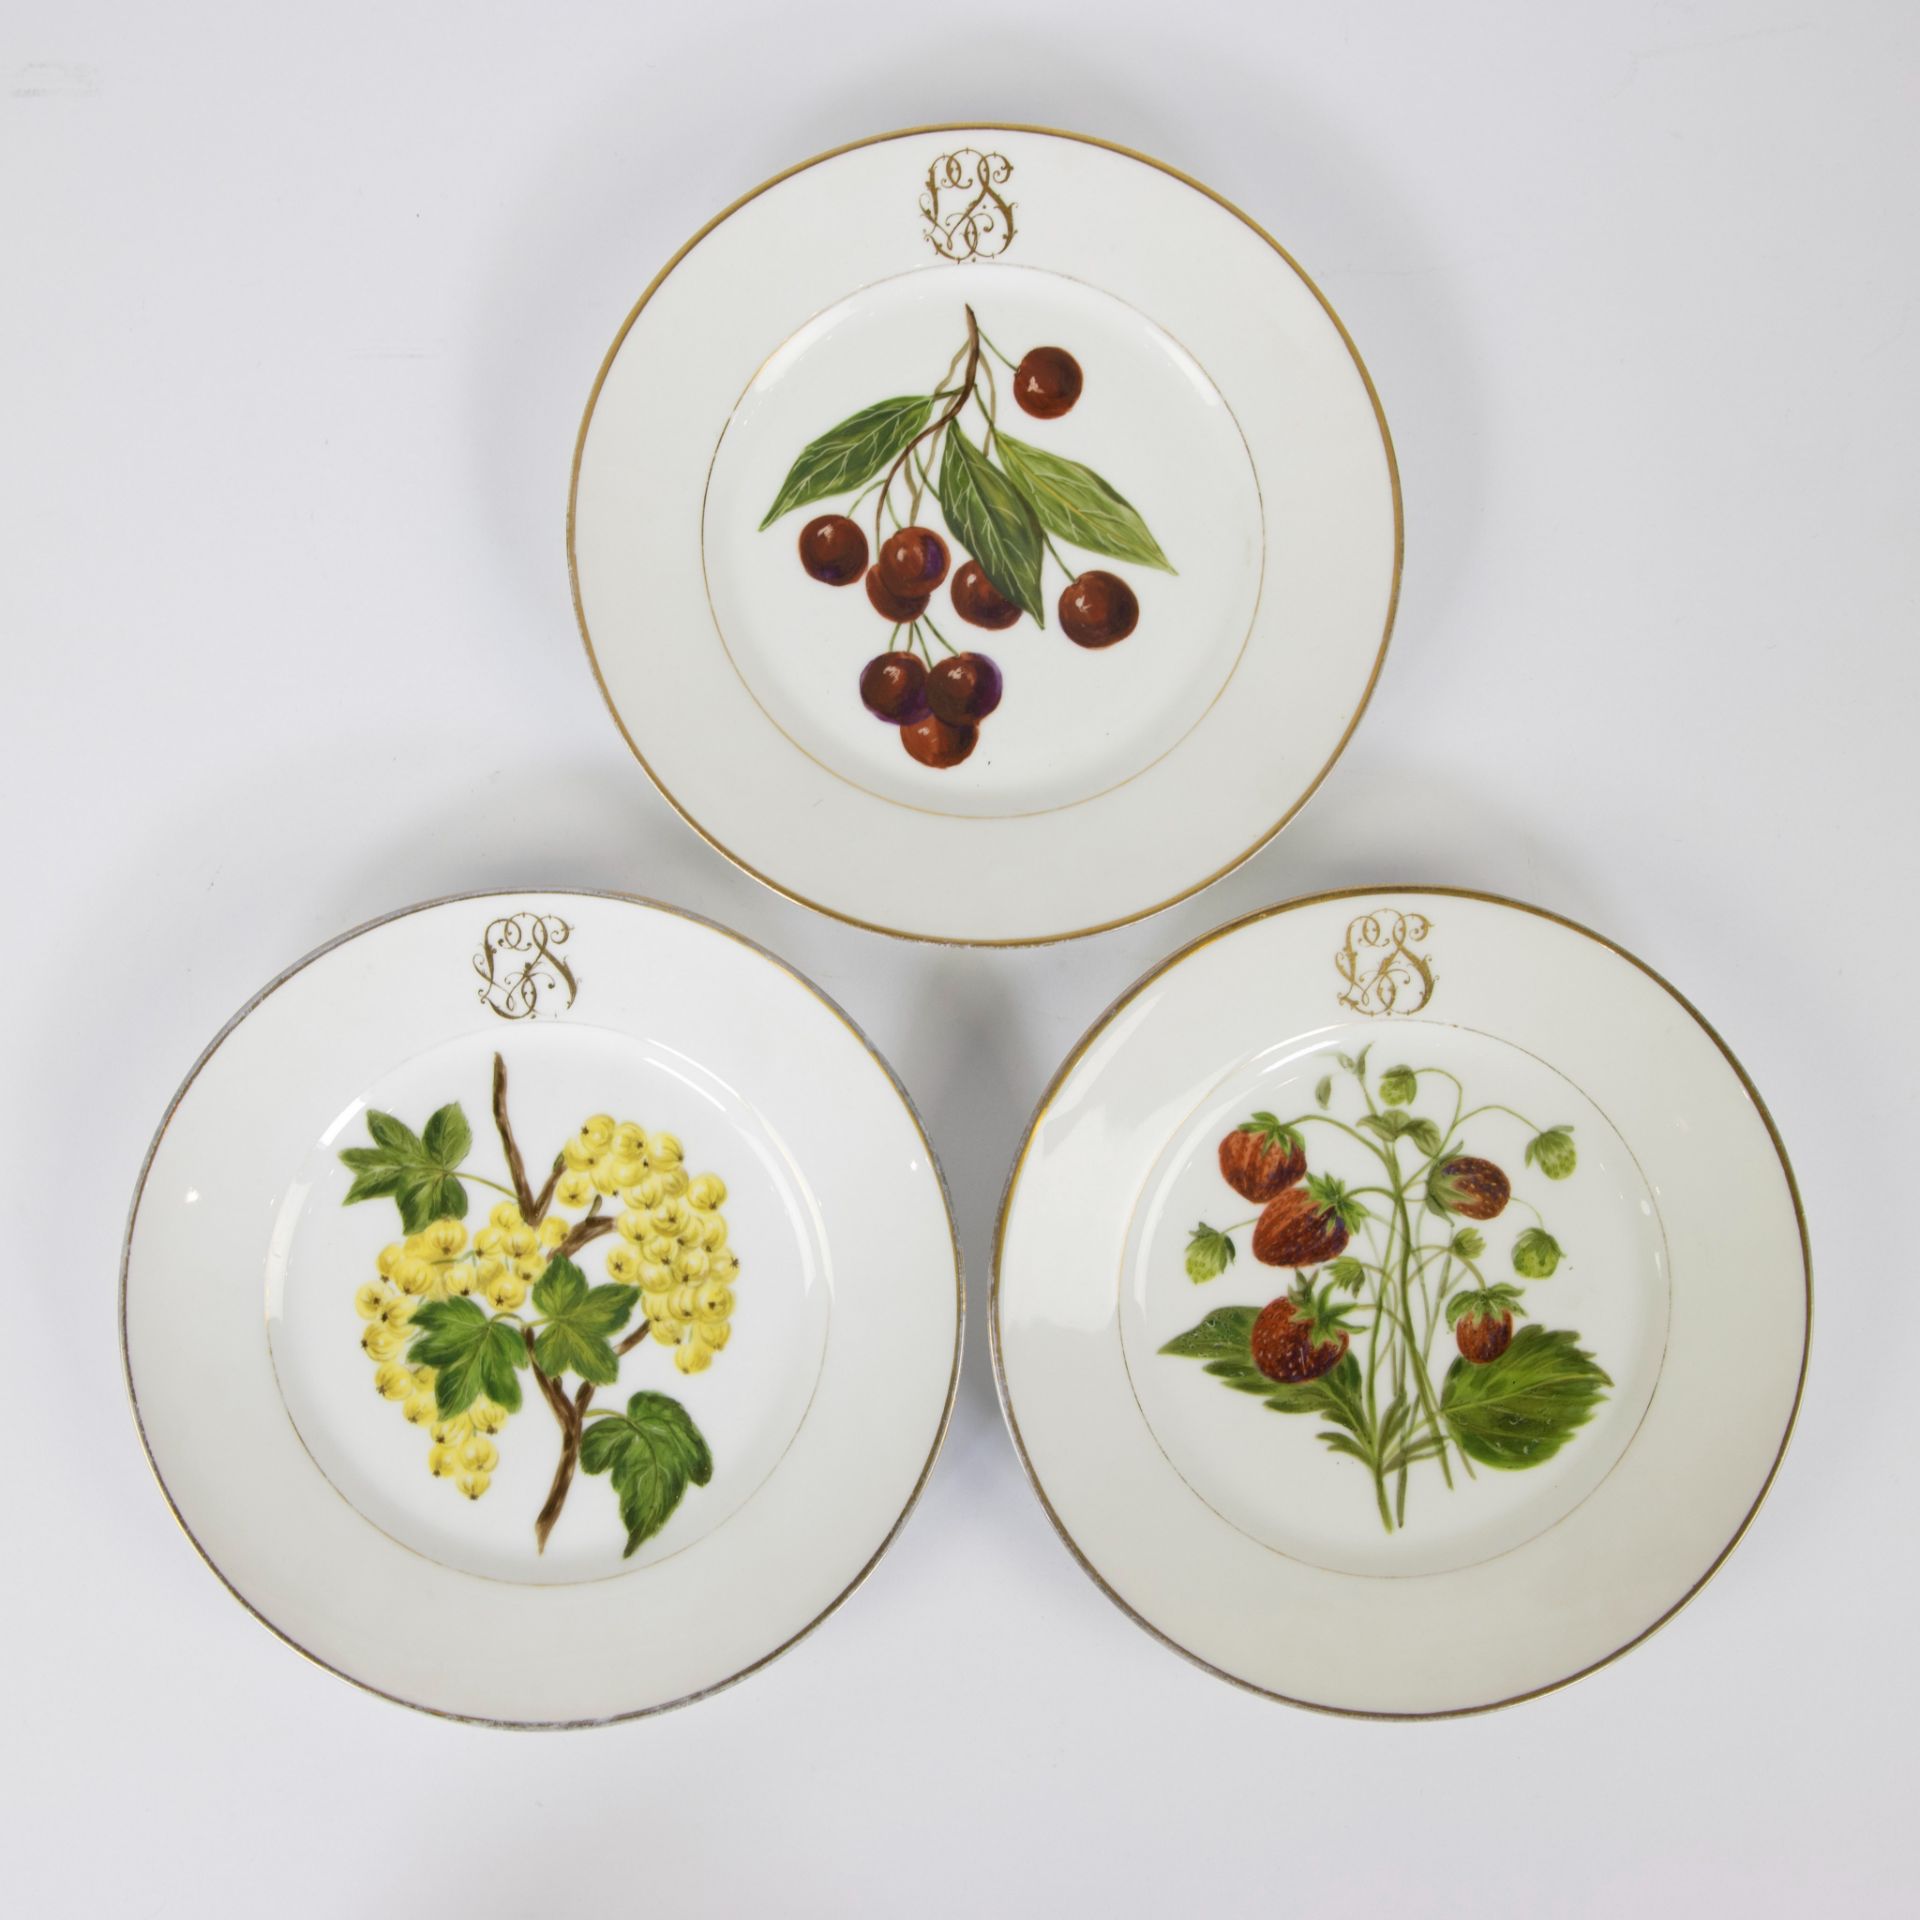 Set of 9 Limoges plates with hand-painted floral decor, with decorated initials, 19th century. - Bild 4 aus 4